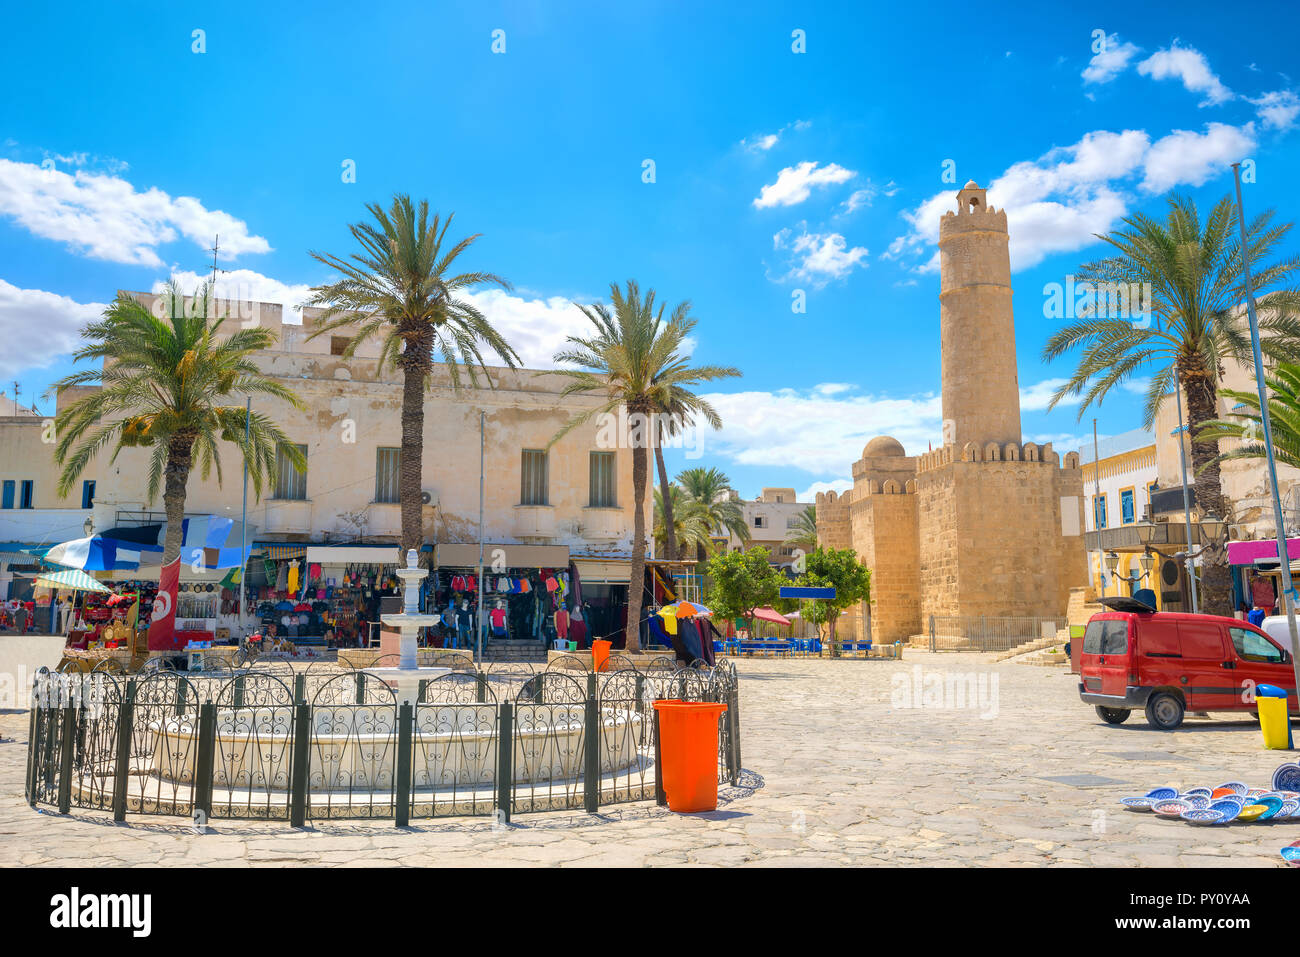 Cityscape with central square and view of ancient fortress Ribat in Sousse. Tunisia, North Africa Stock Photo